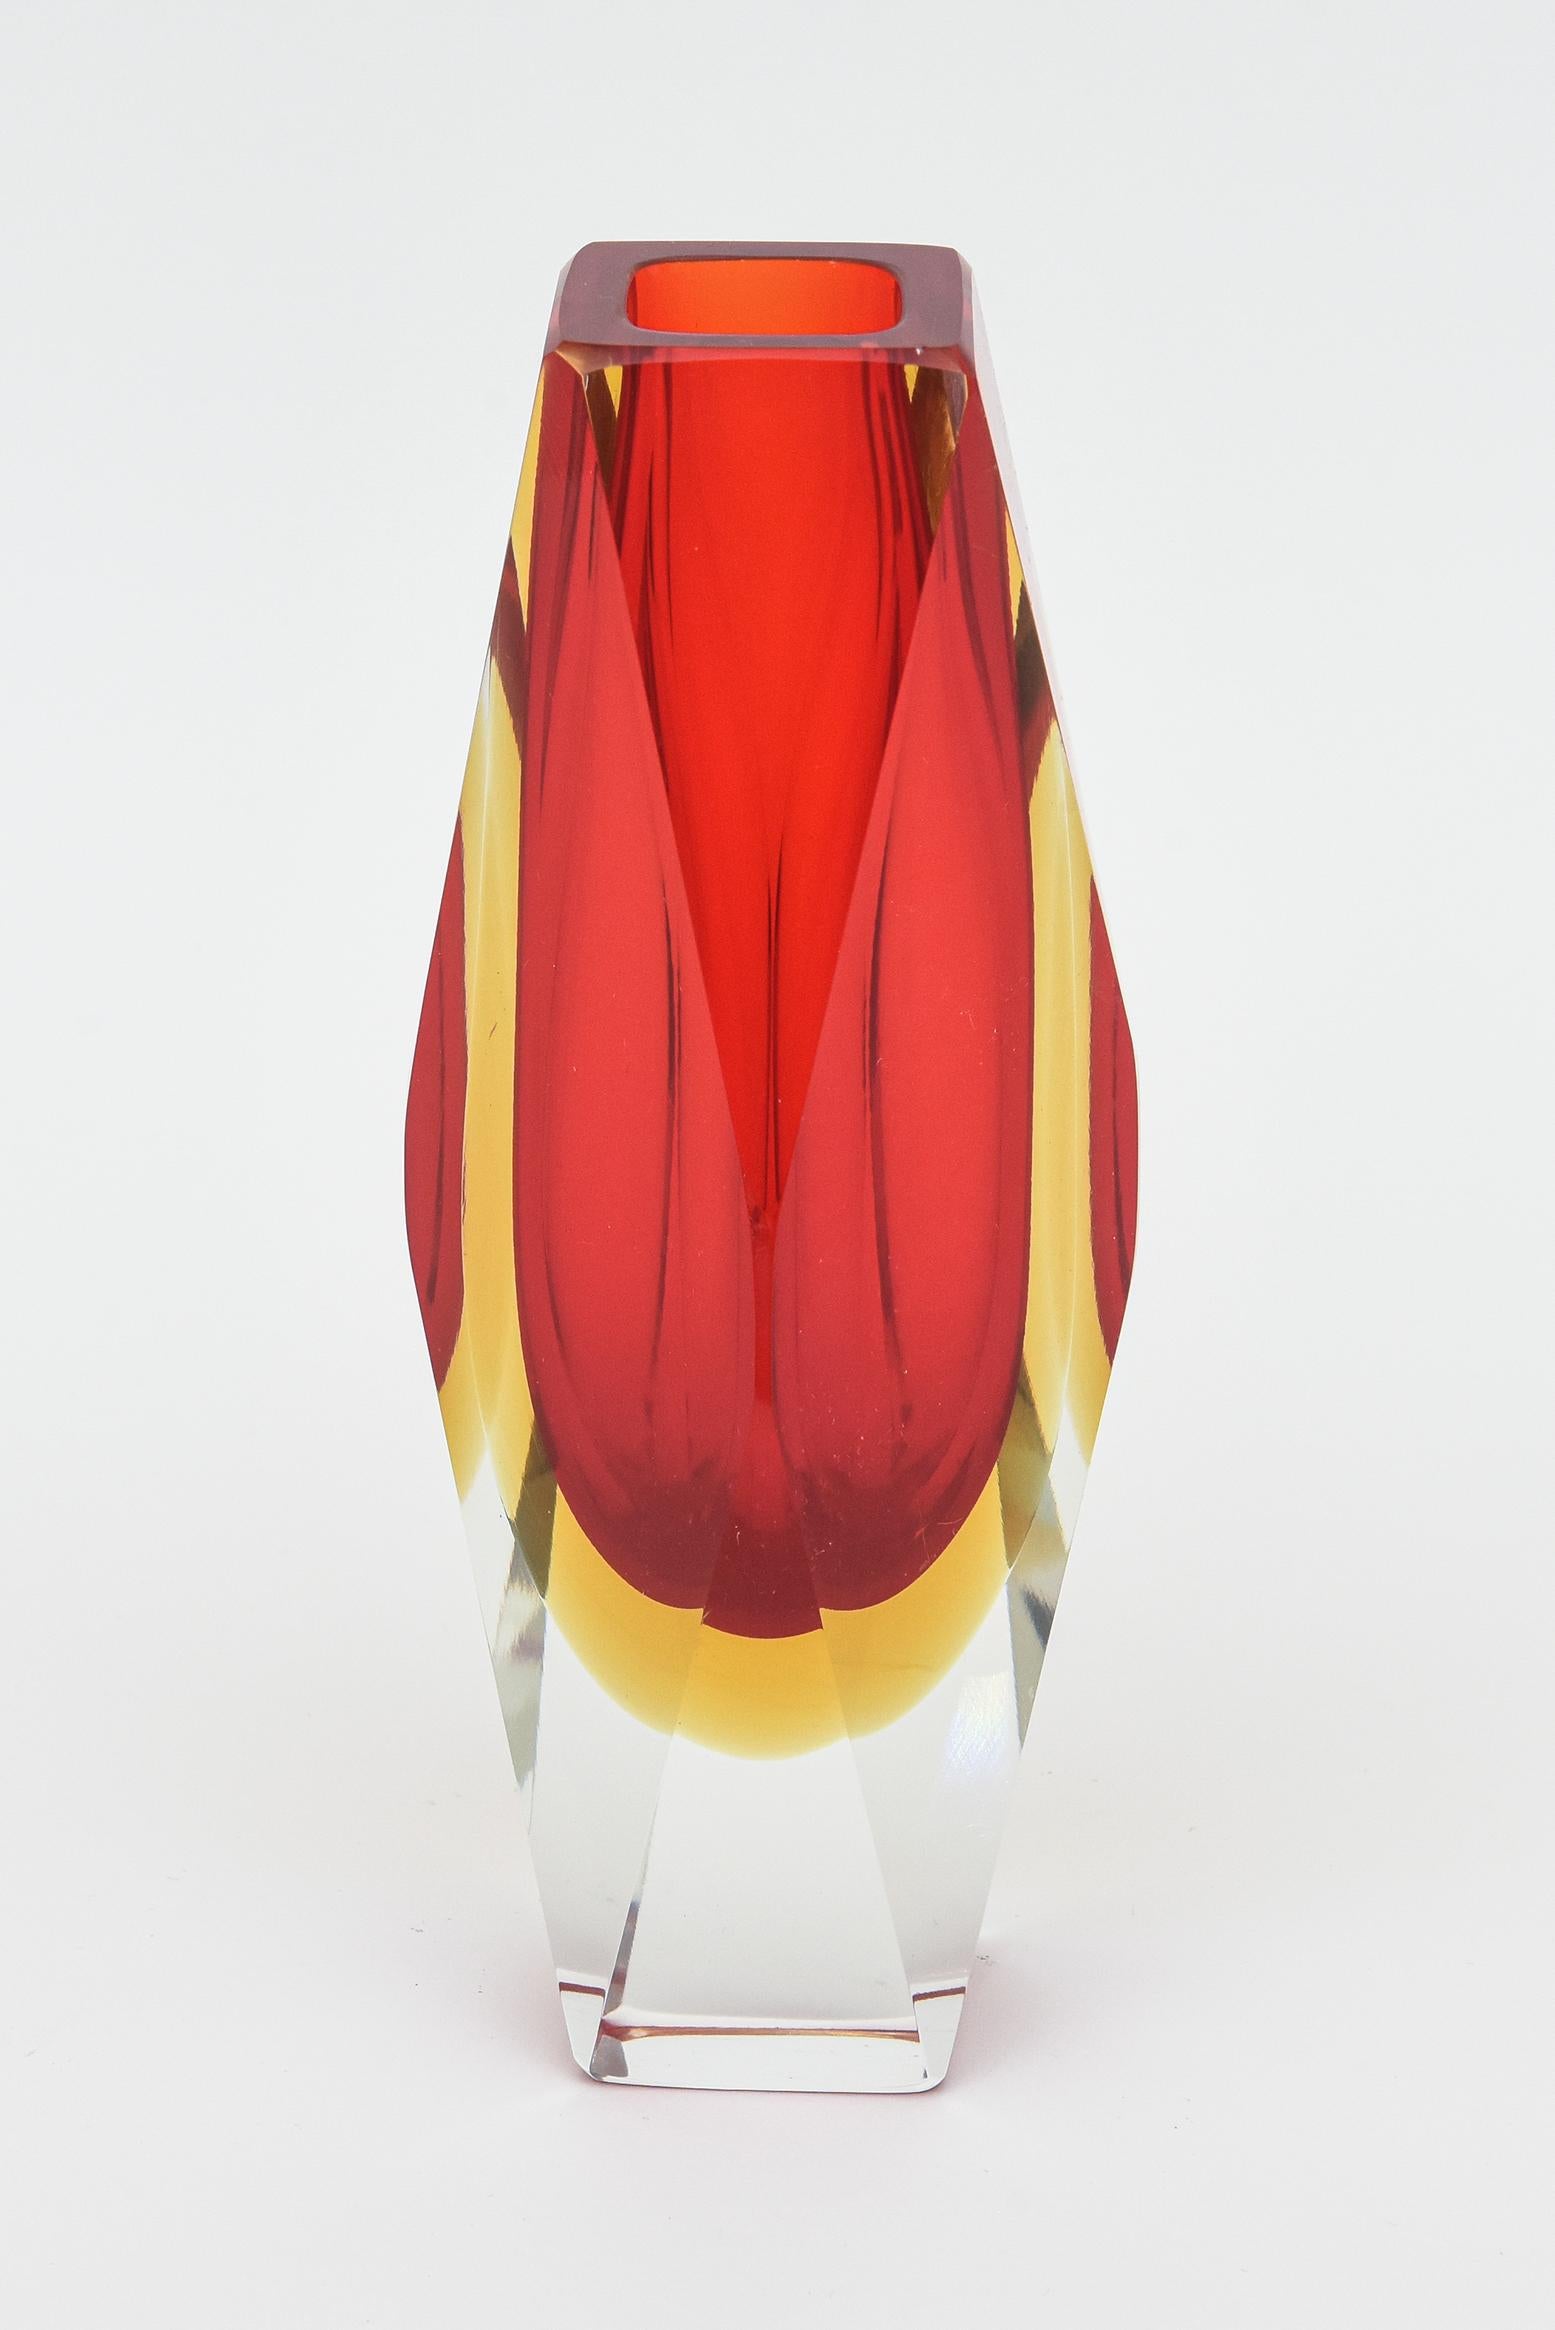 Modern Mandruzzato Vintage Murano Red and Yellow Sommerso Faceted Glass Vase Italian For Sale